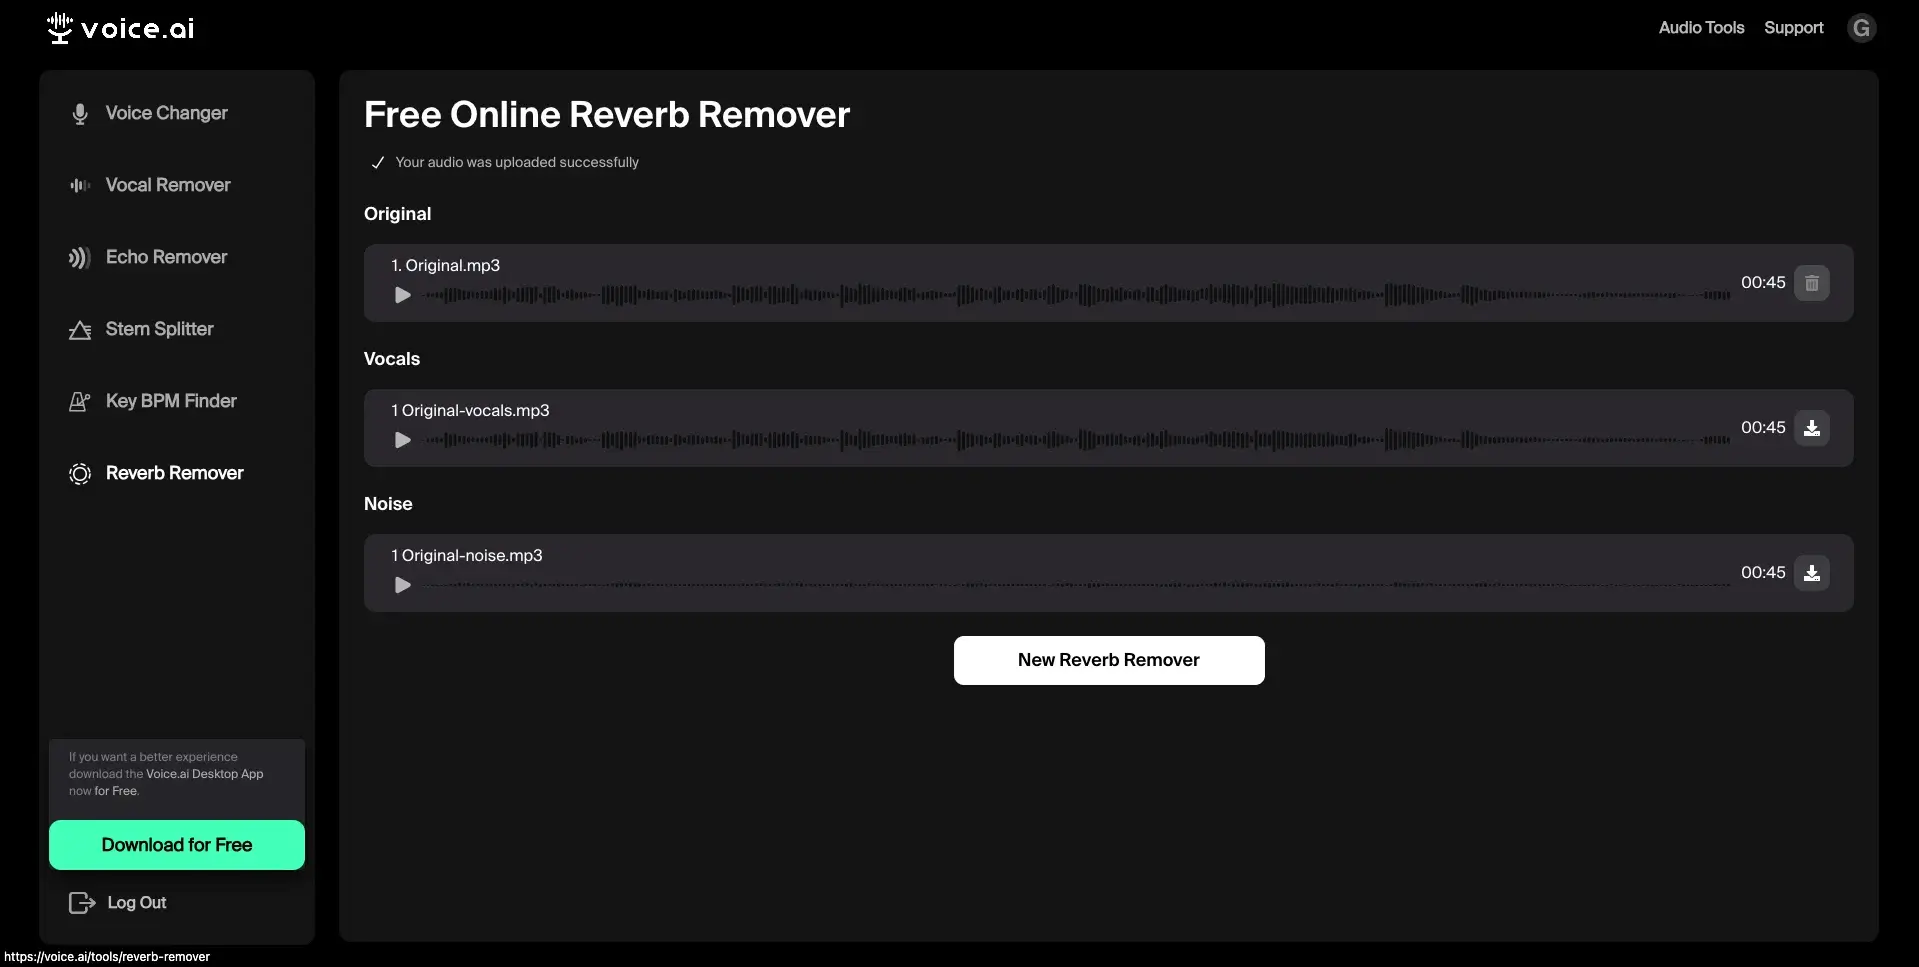 Reverb Remover Results